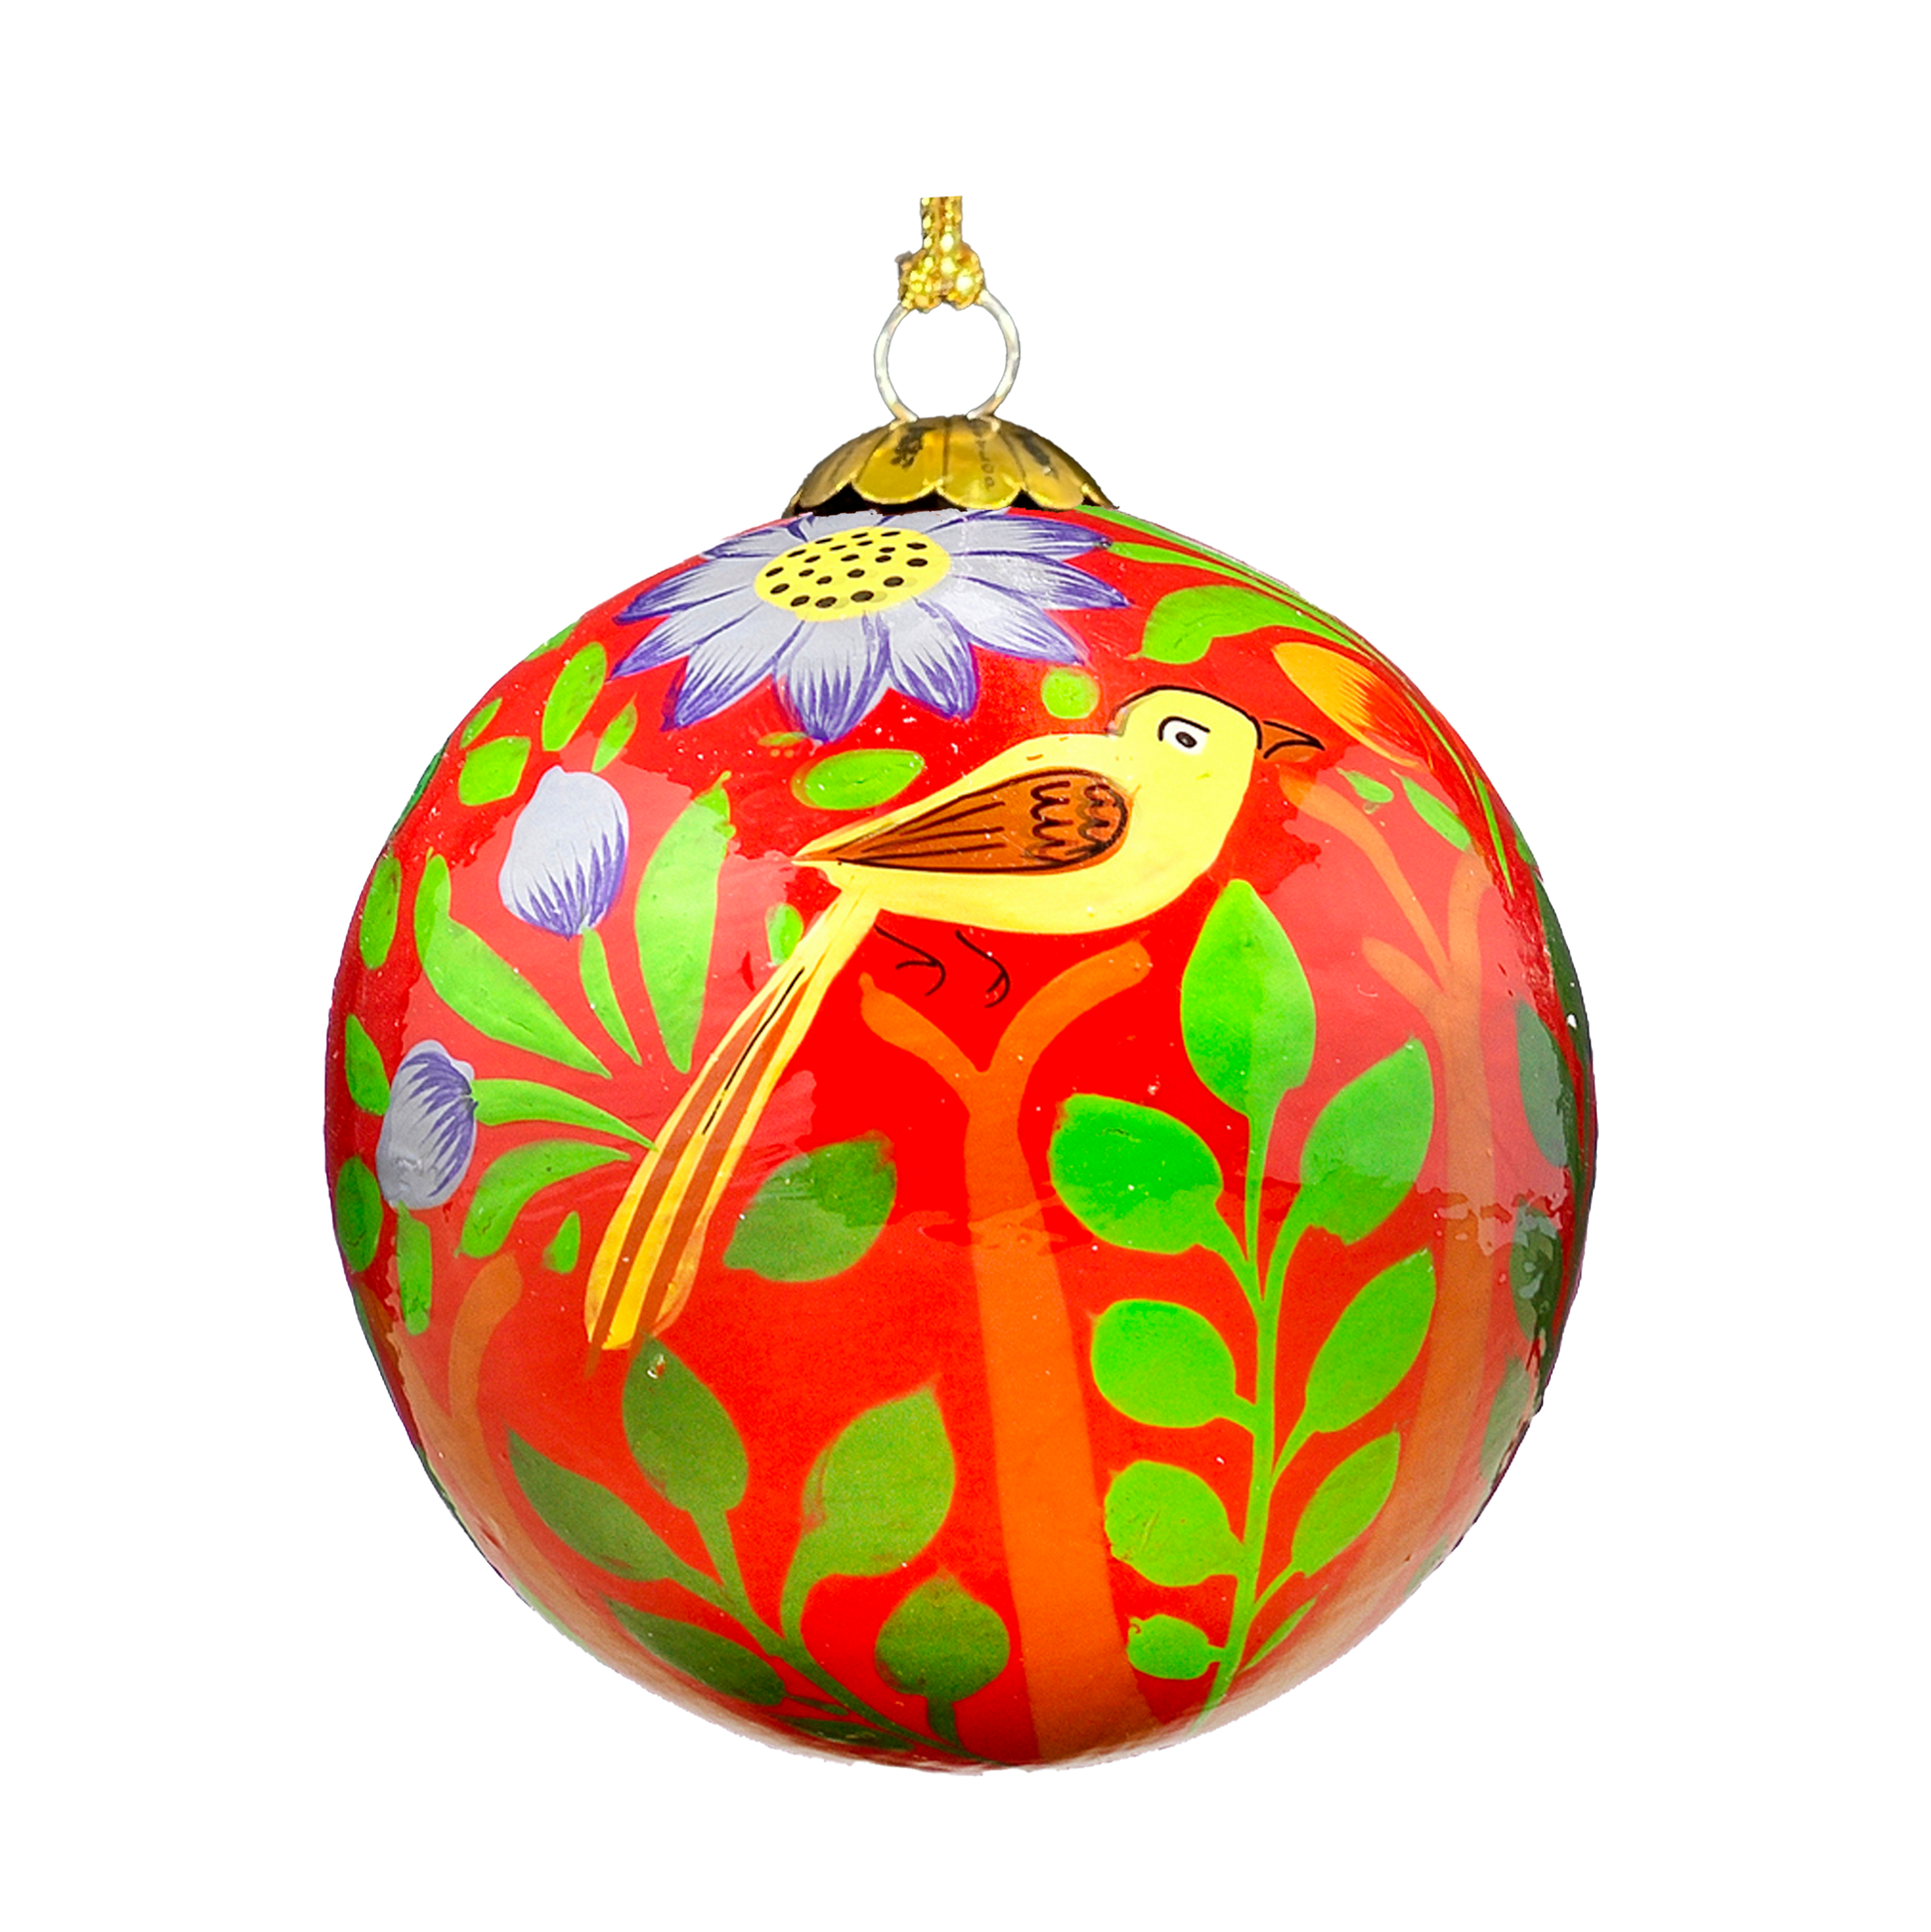 Birds of Paradise Red Christmas Bauble for Christmas tree decorations